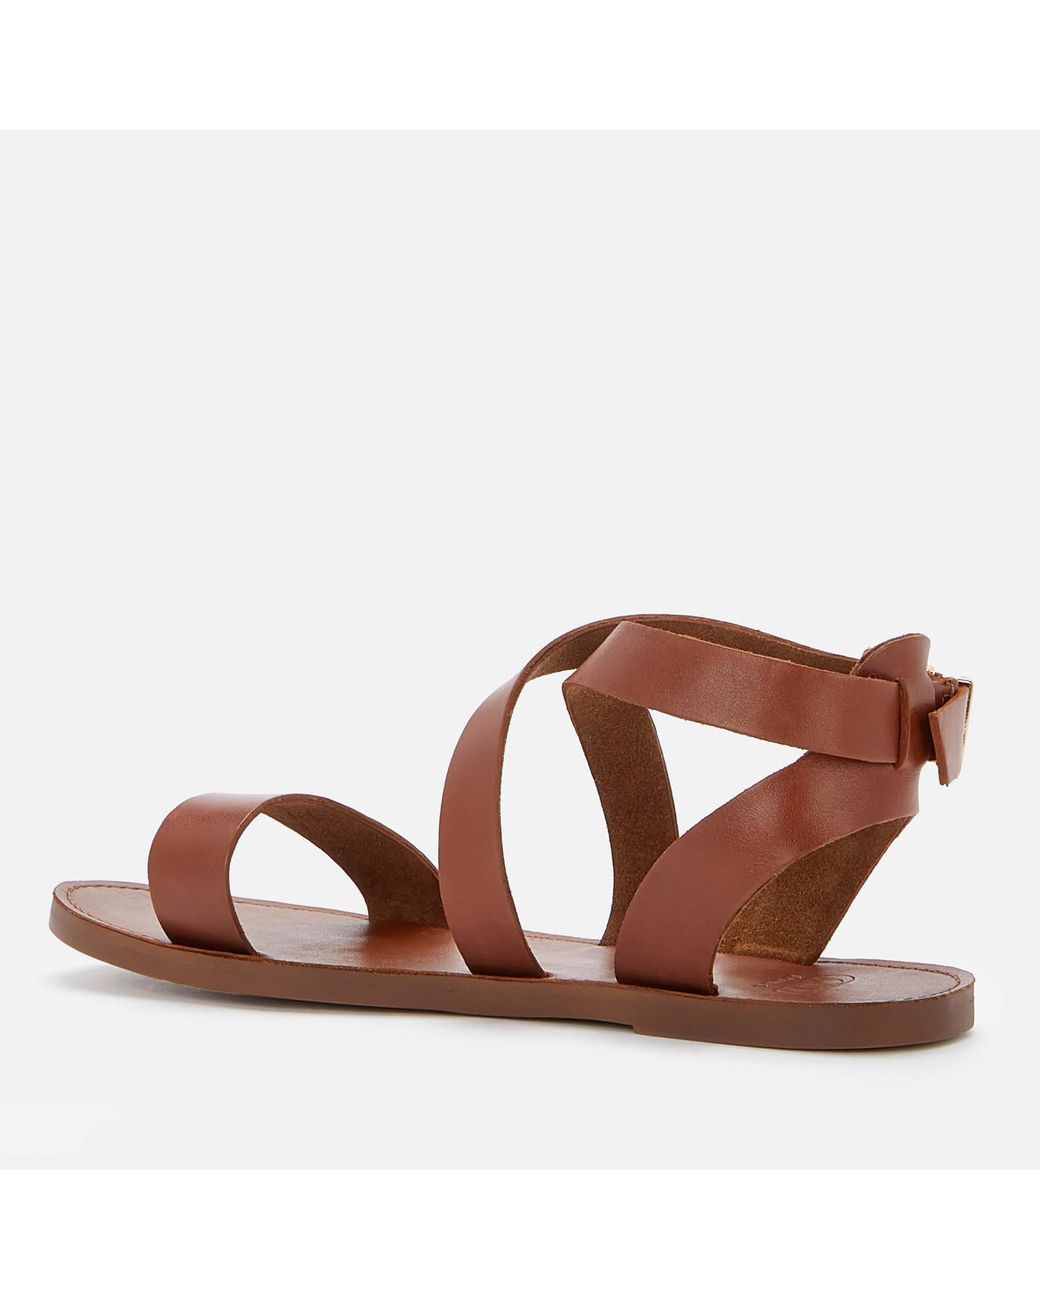 Dune Leels Leather Flat Sandals in Tan (Brown) - Lyst